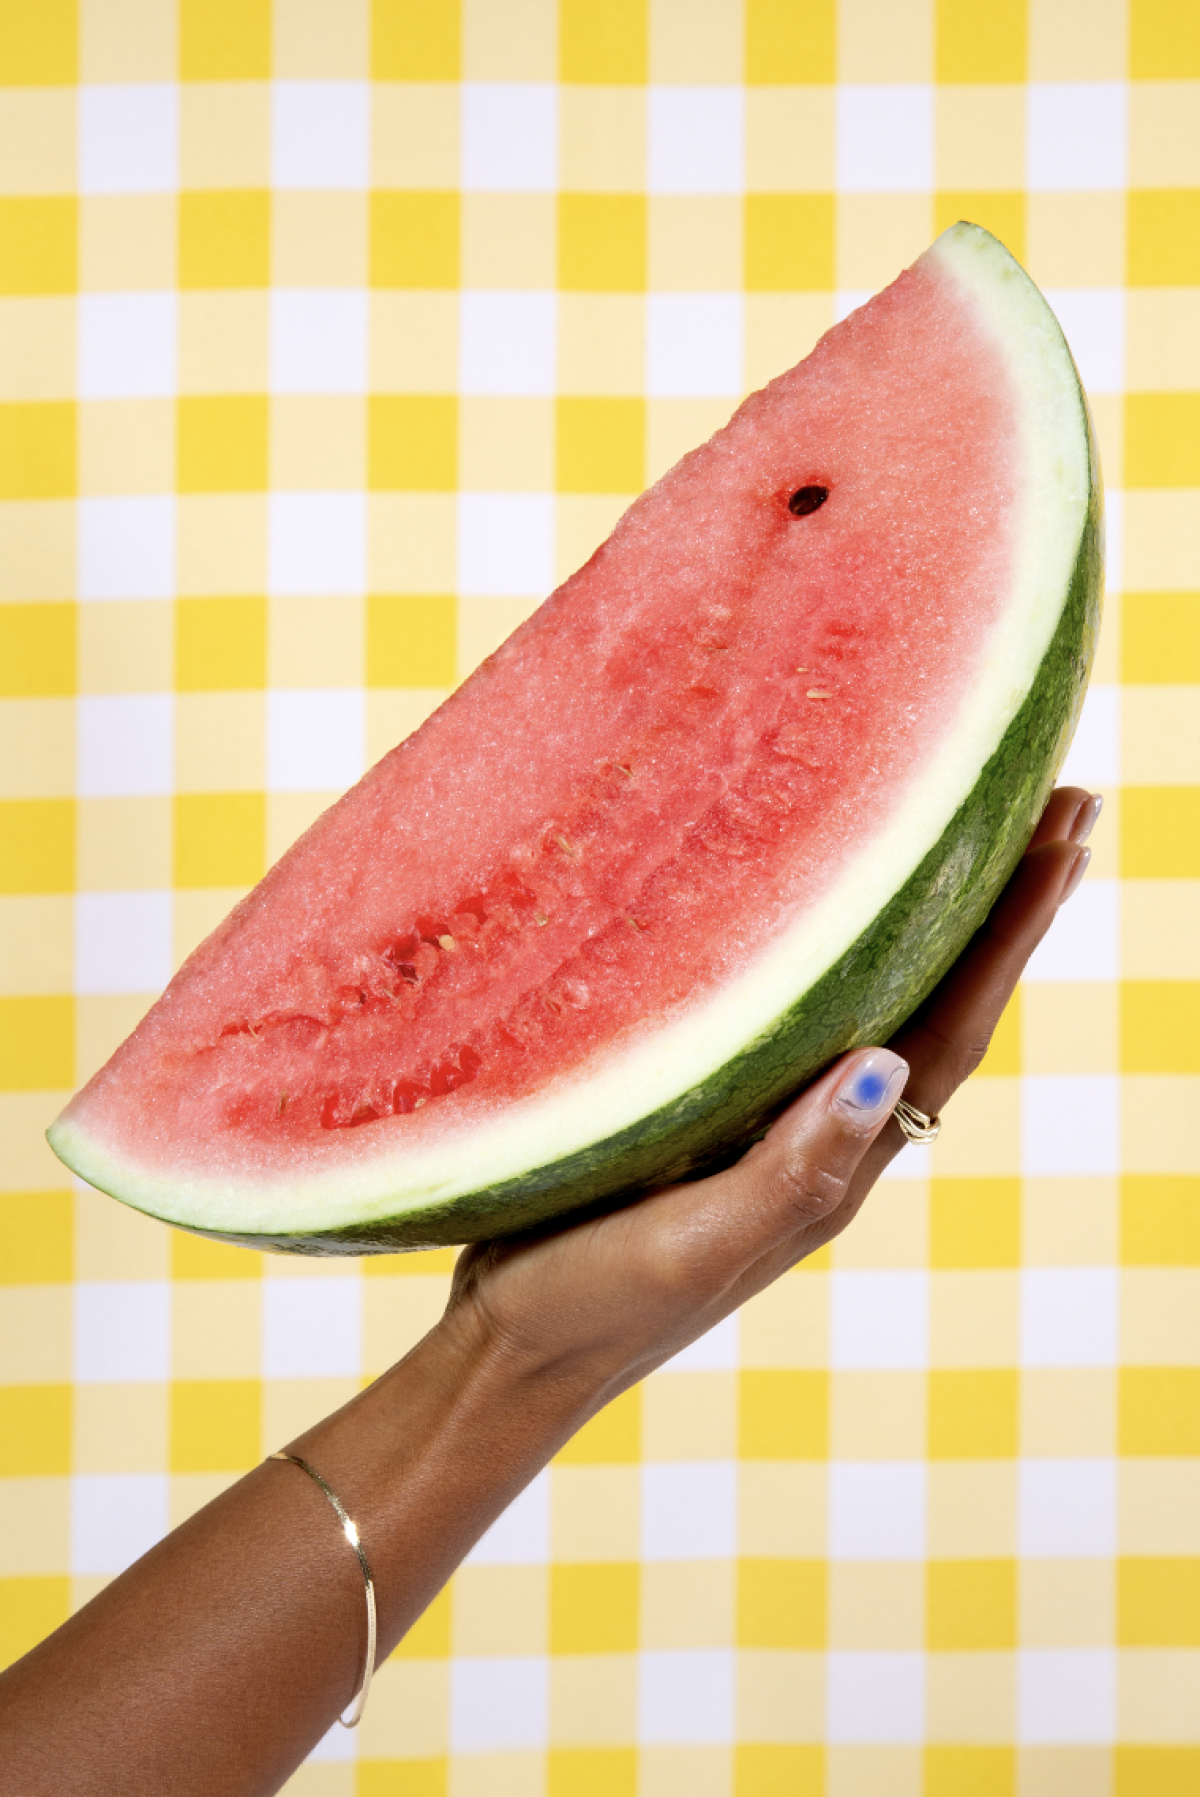 A hand holds up a large wedge of watermelon